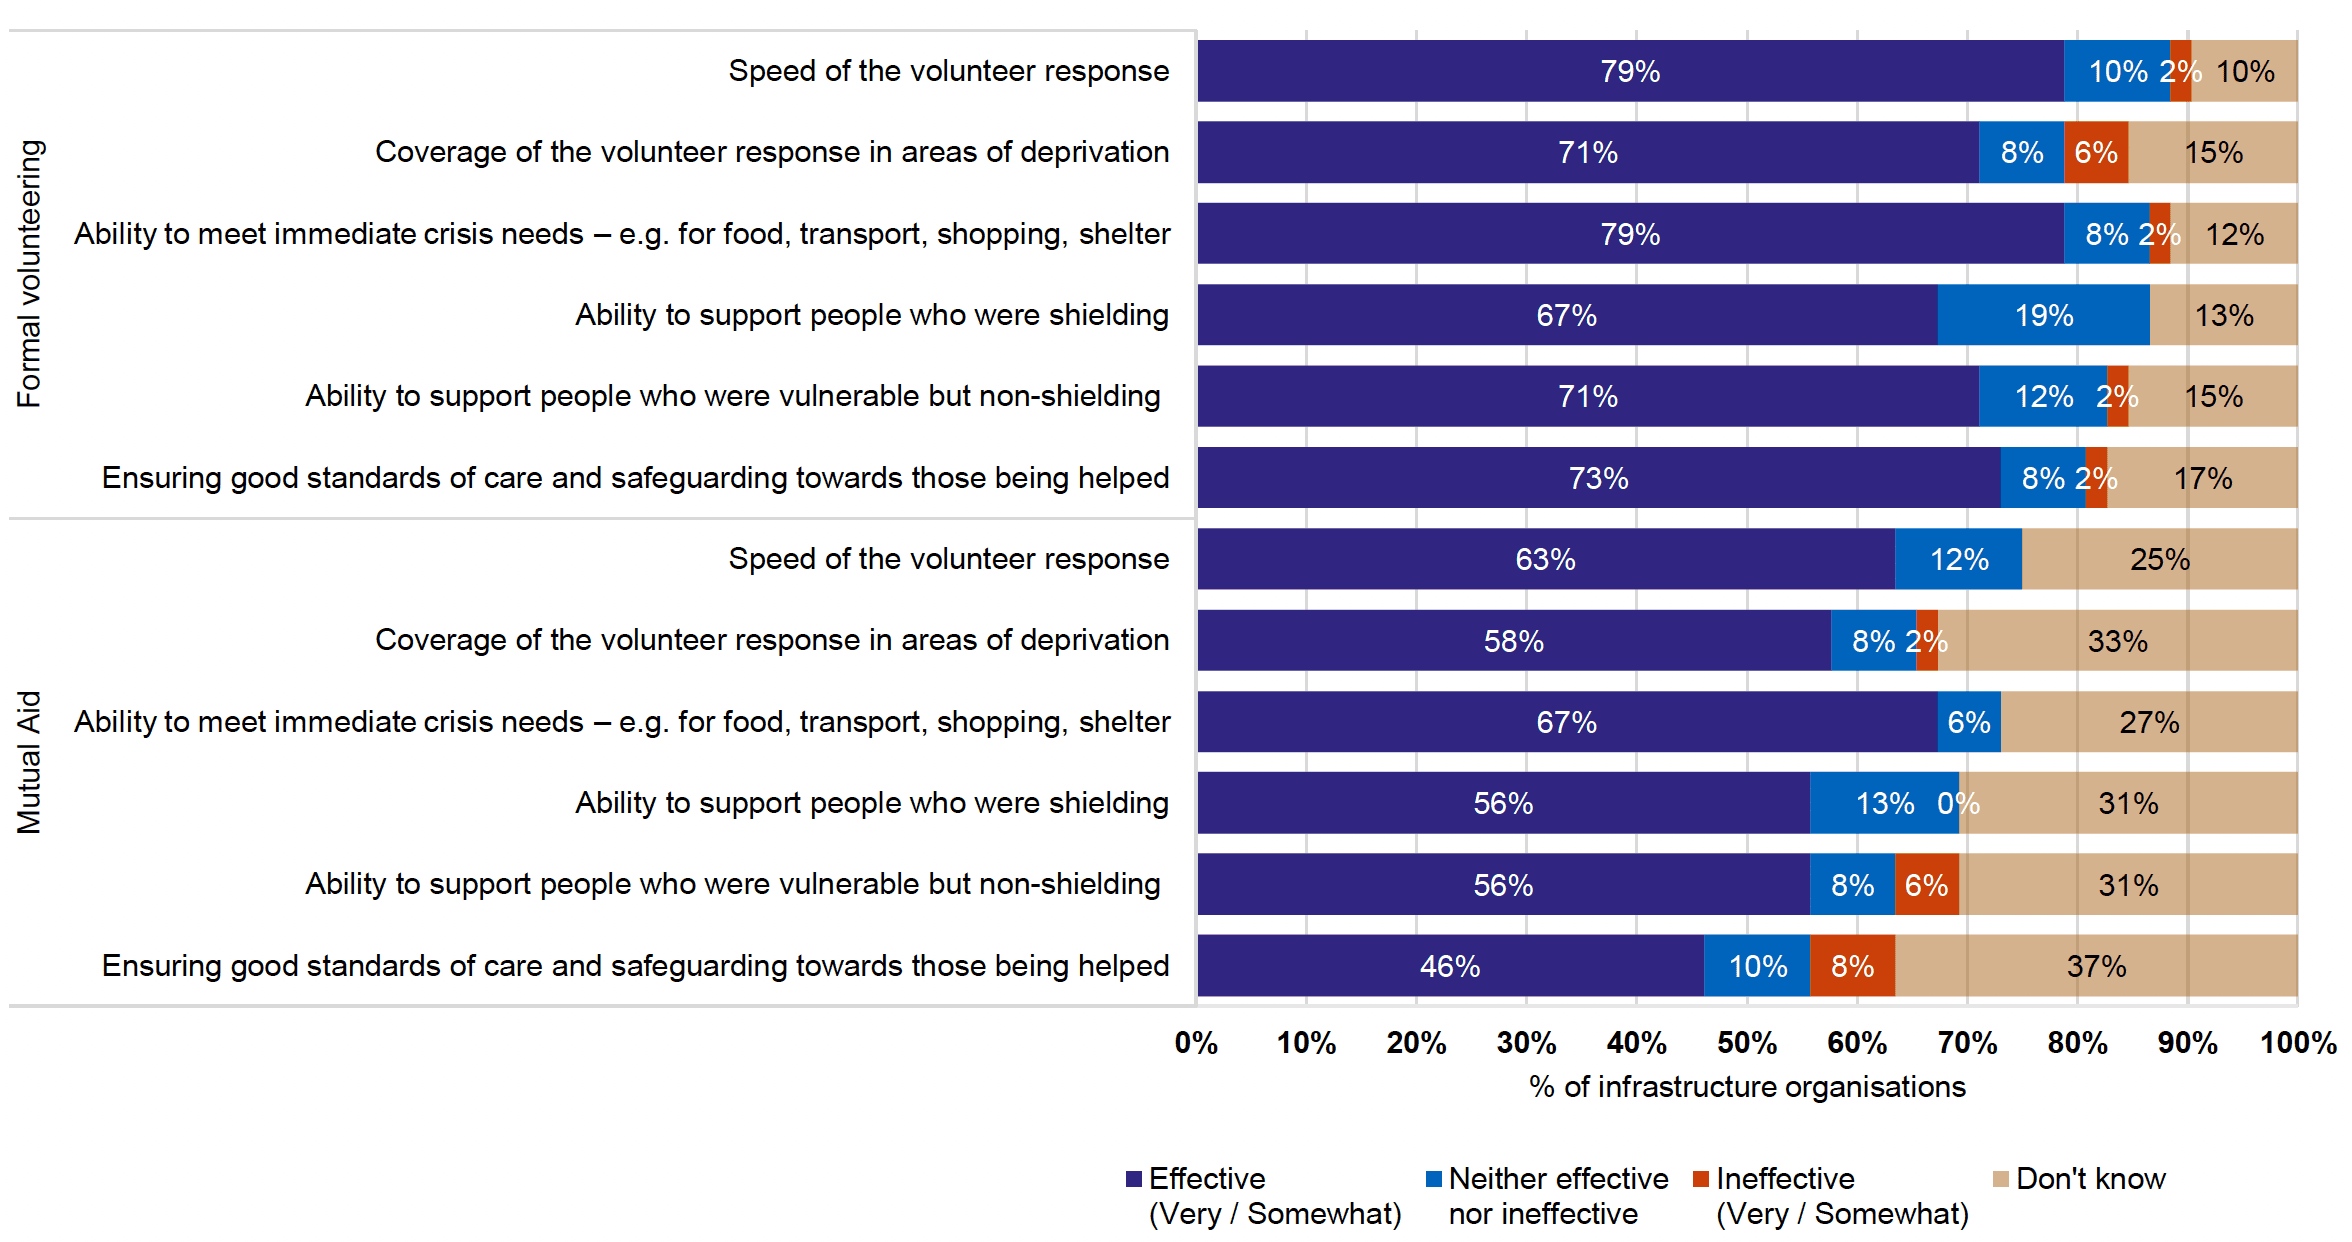 Chart showing infrastructure organisation views on the effectiveness of formal and mutual aid volunteering in the second lockdown (Dec
2020-Apr 2021)
